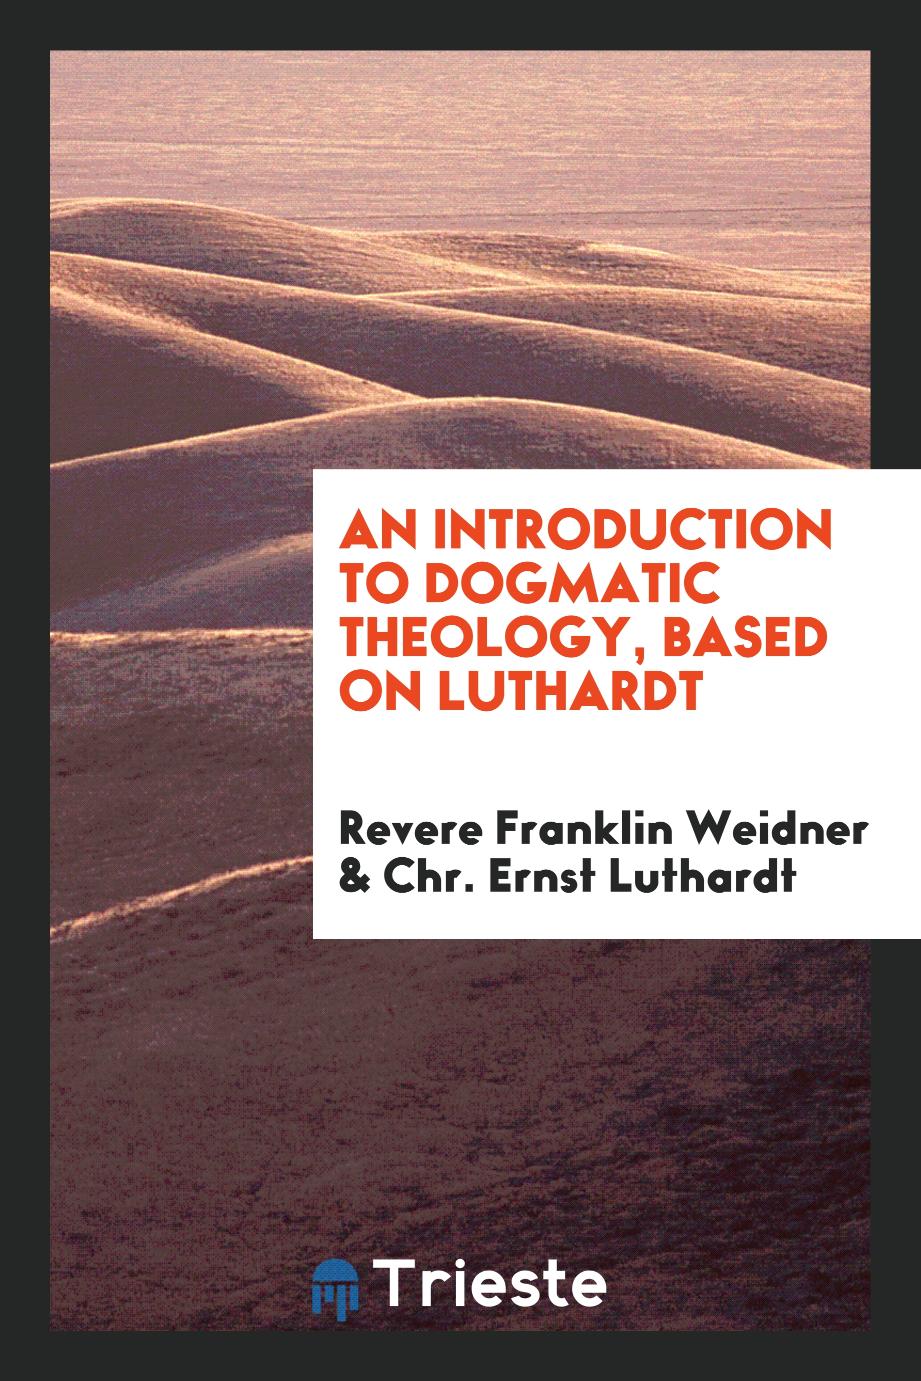 An introduction to dogmatic theology, based on Luthardt